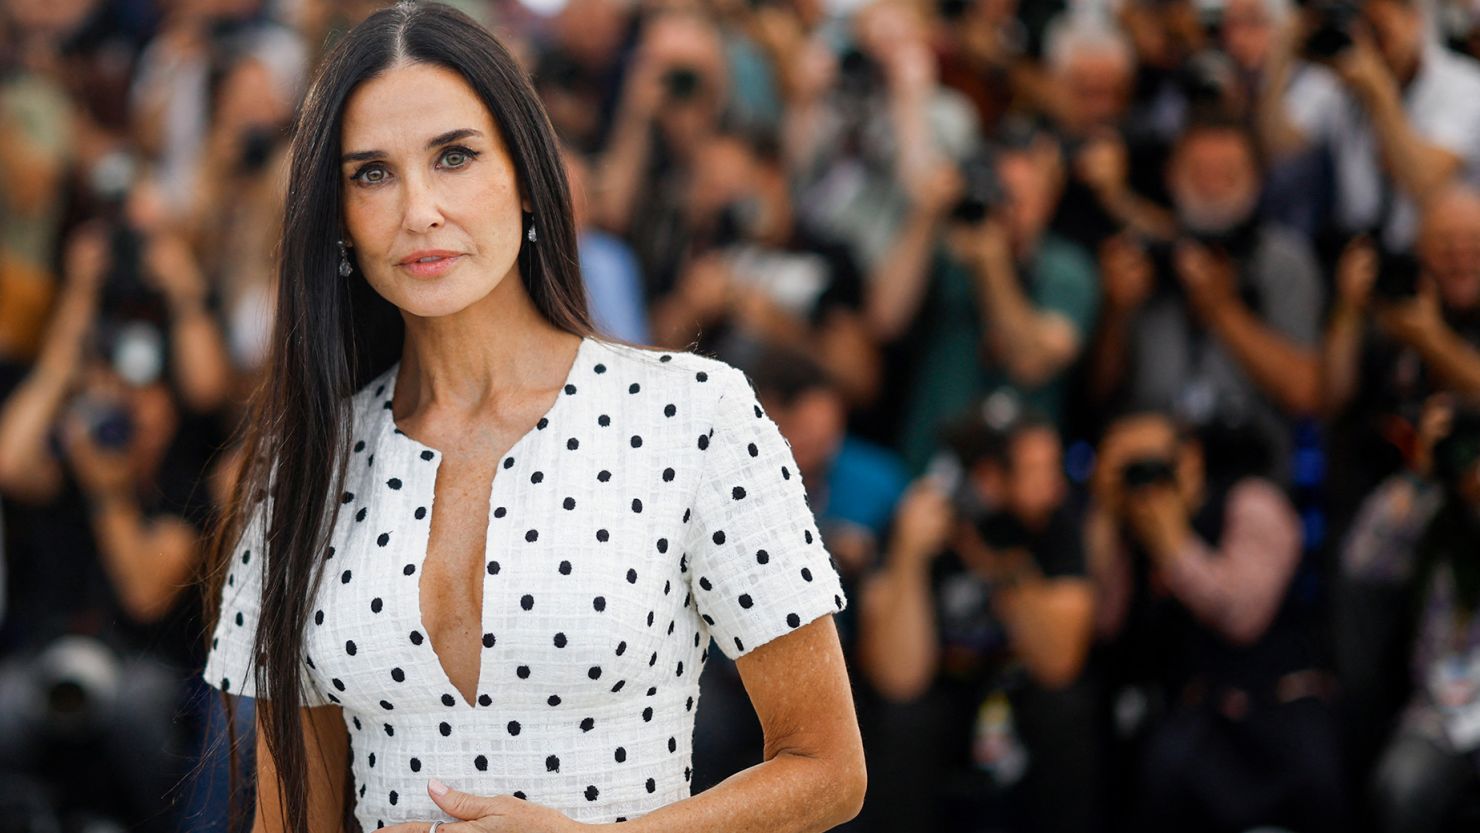 Demi Moore poses during a photocall for the film "The Substance" in competition at the 77th Cannes Film Festival in Cannes, France on Monday. REUTERS/Stephane Mahe